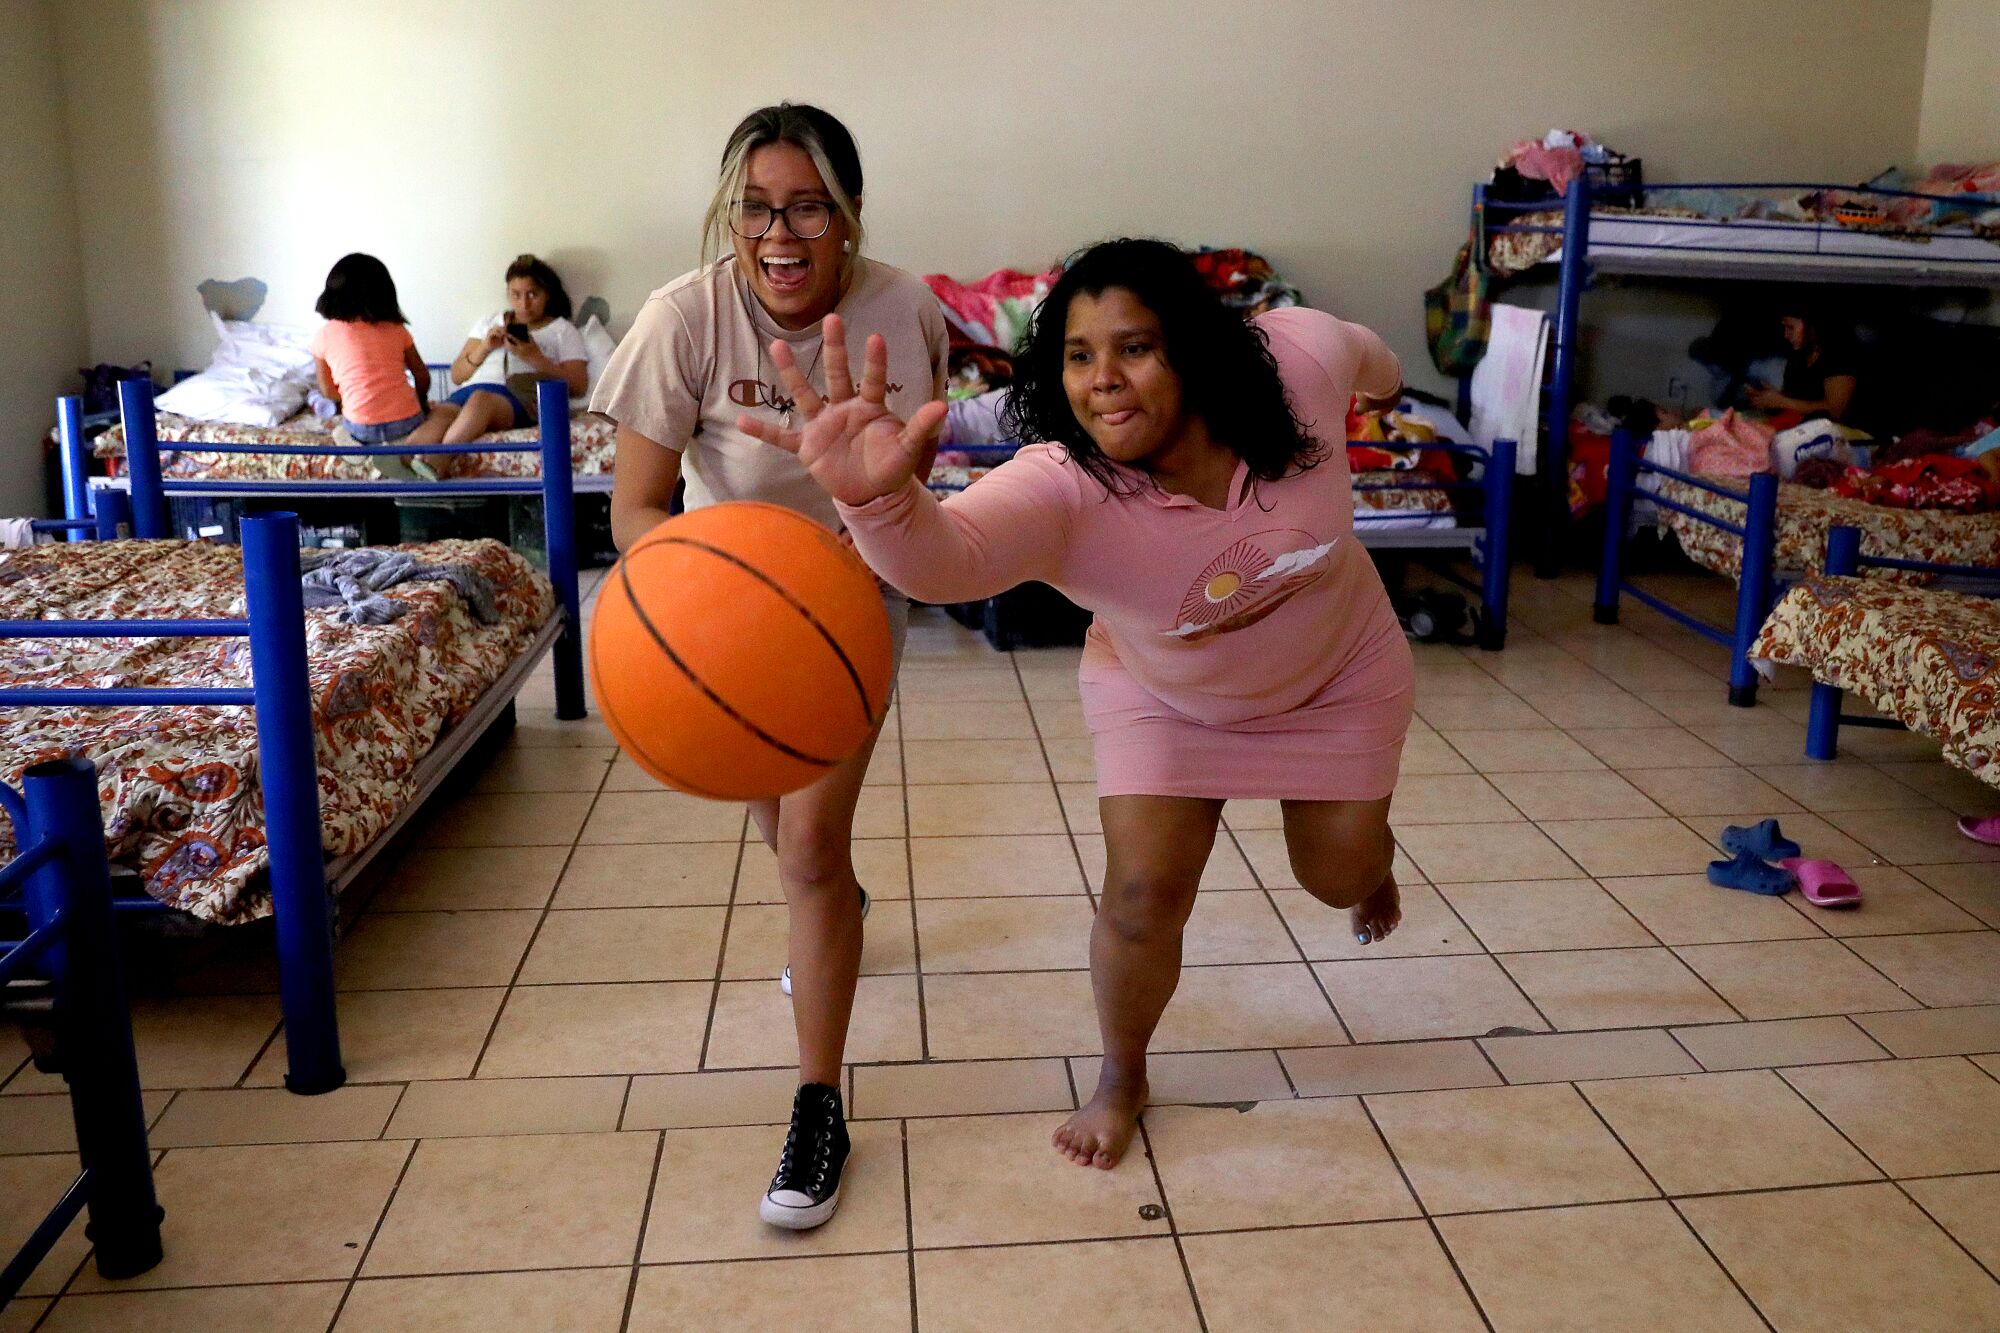  Jennifer Angel Constancio, 15, left, of Michoacan, Mexico, and Duria Romero, 32, of Honduras, play a game of keep a way .